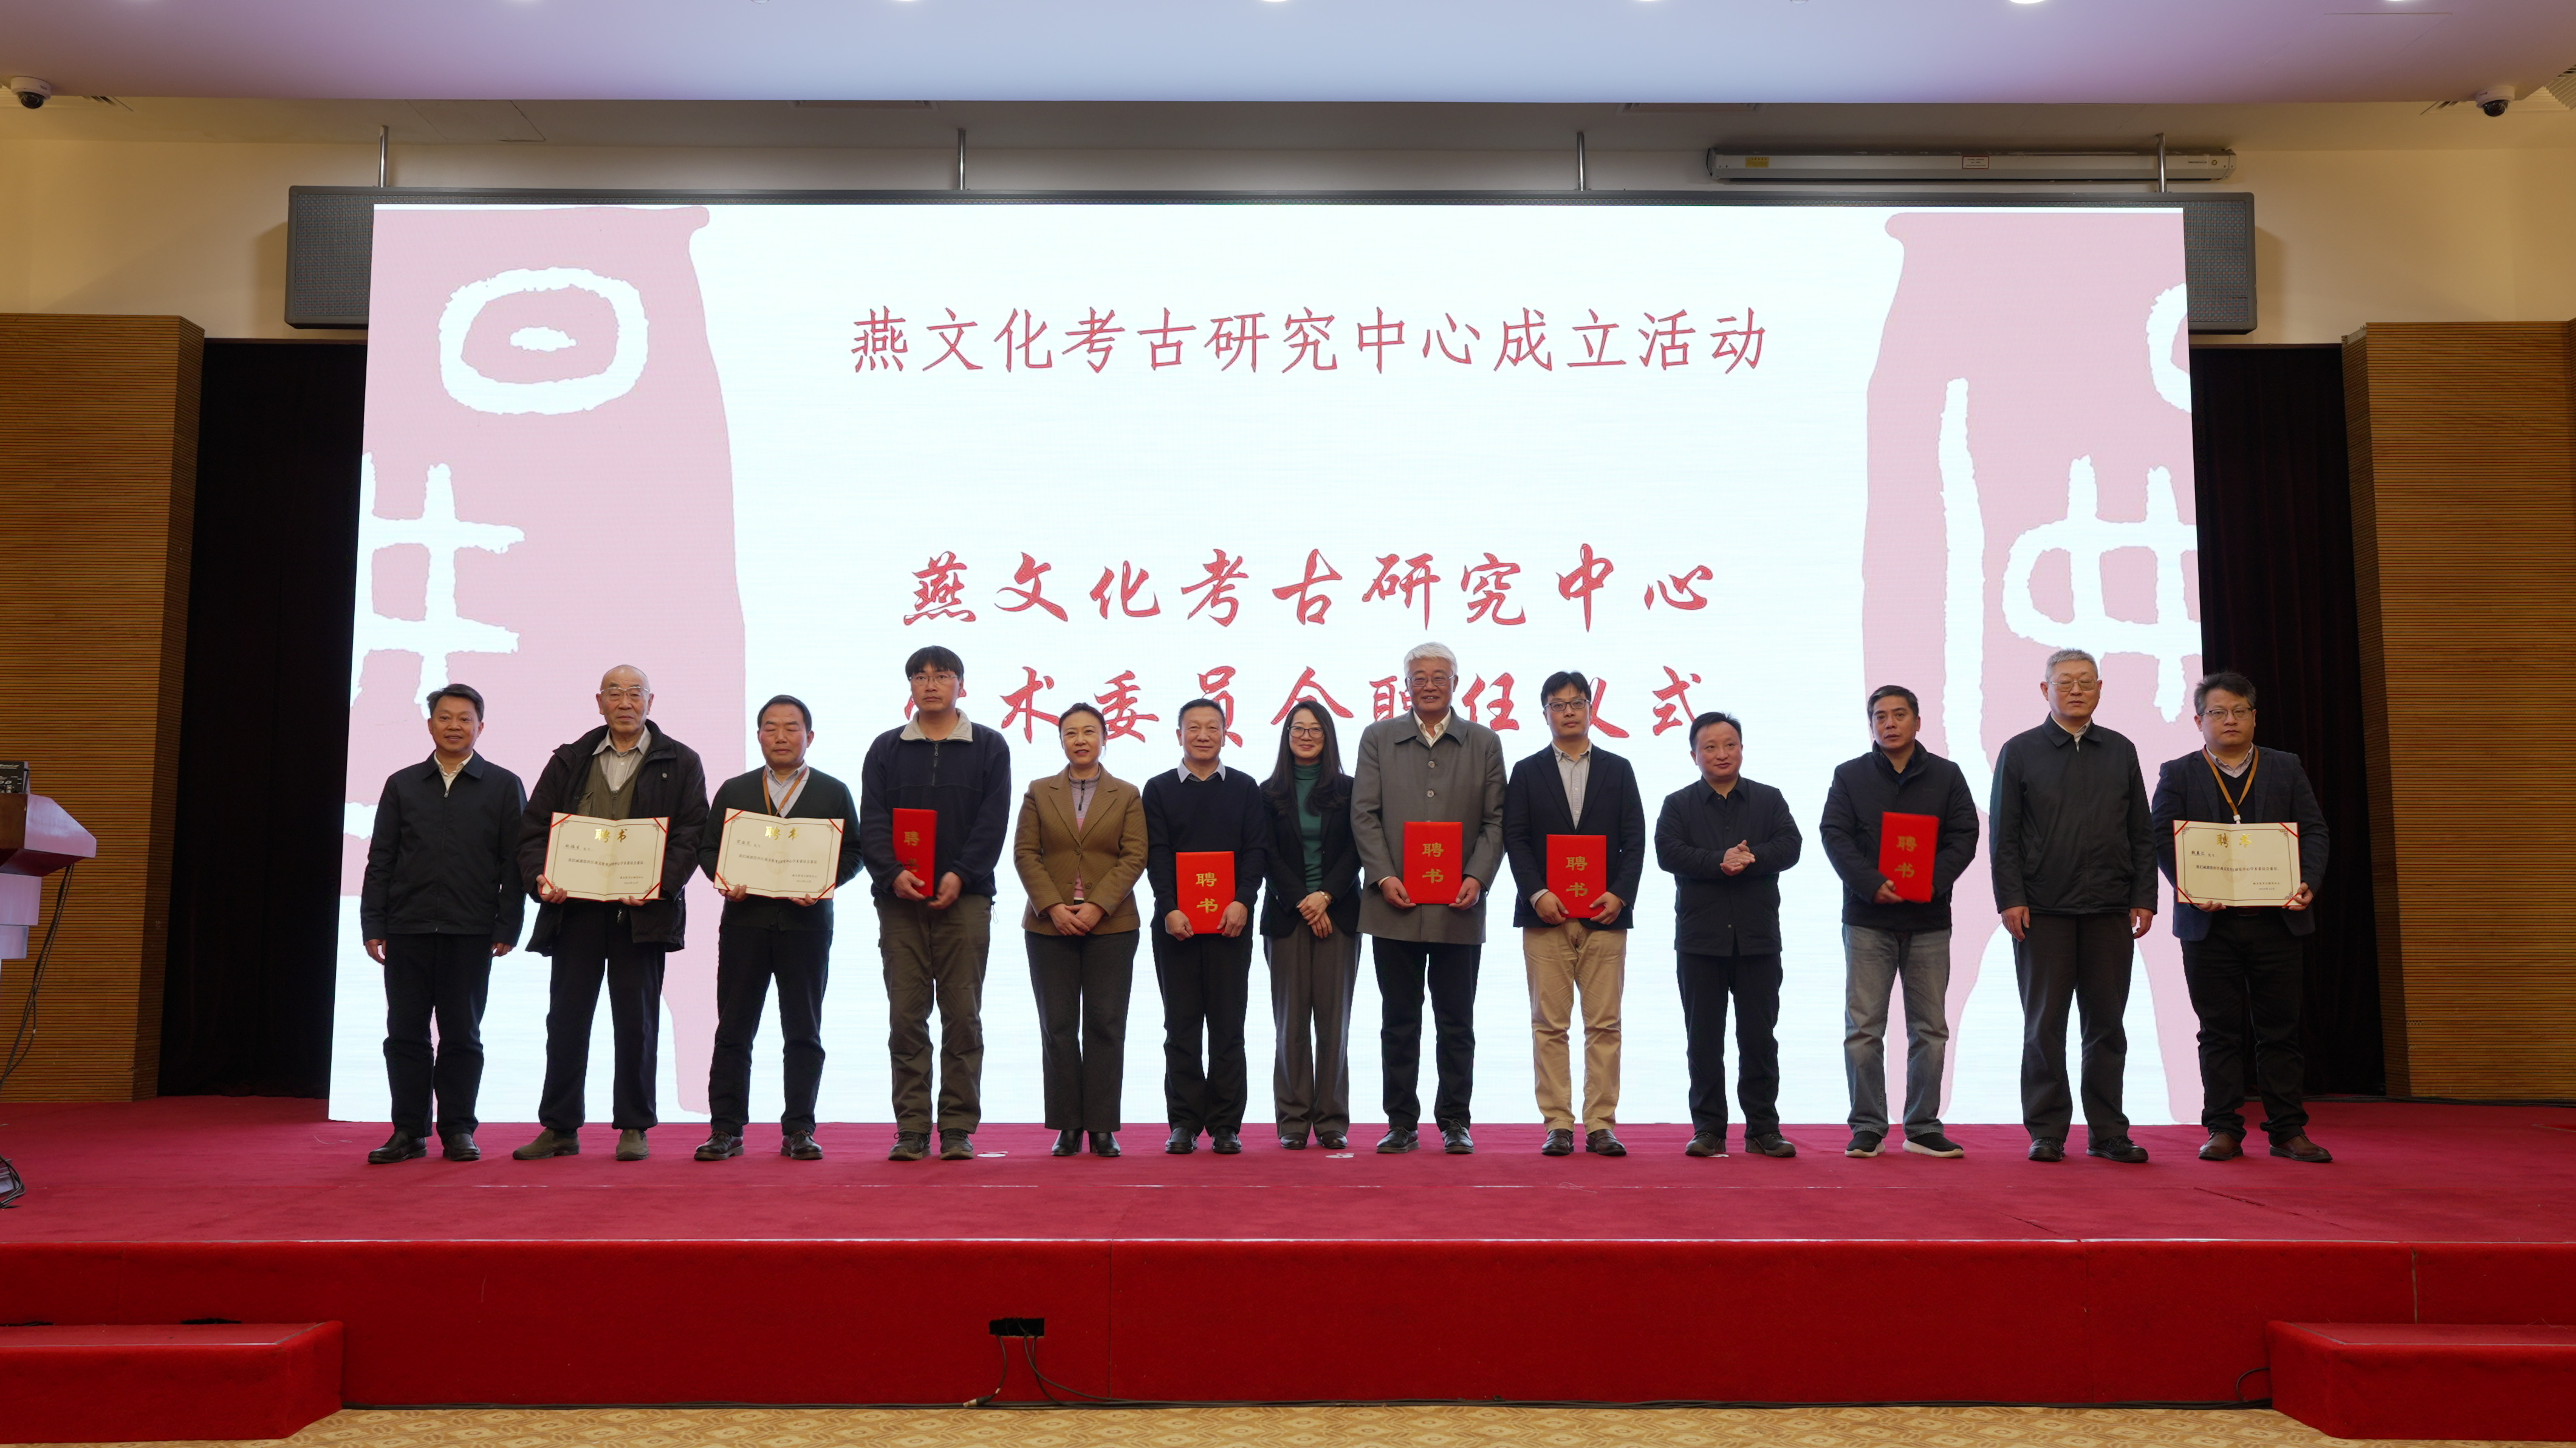 Research Center for Archaeology of Yan Culture has been officially established in Beijing on Sunday. Photo: Courtesy of Research Center for Archaeology of Yan Culture